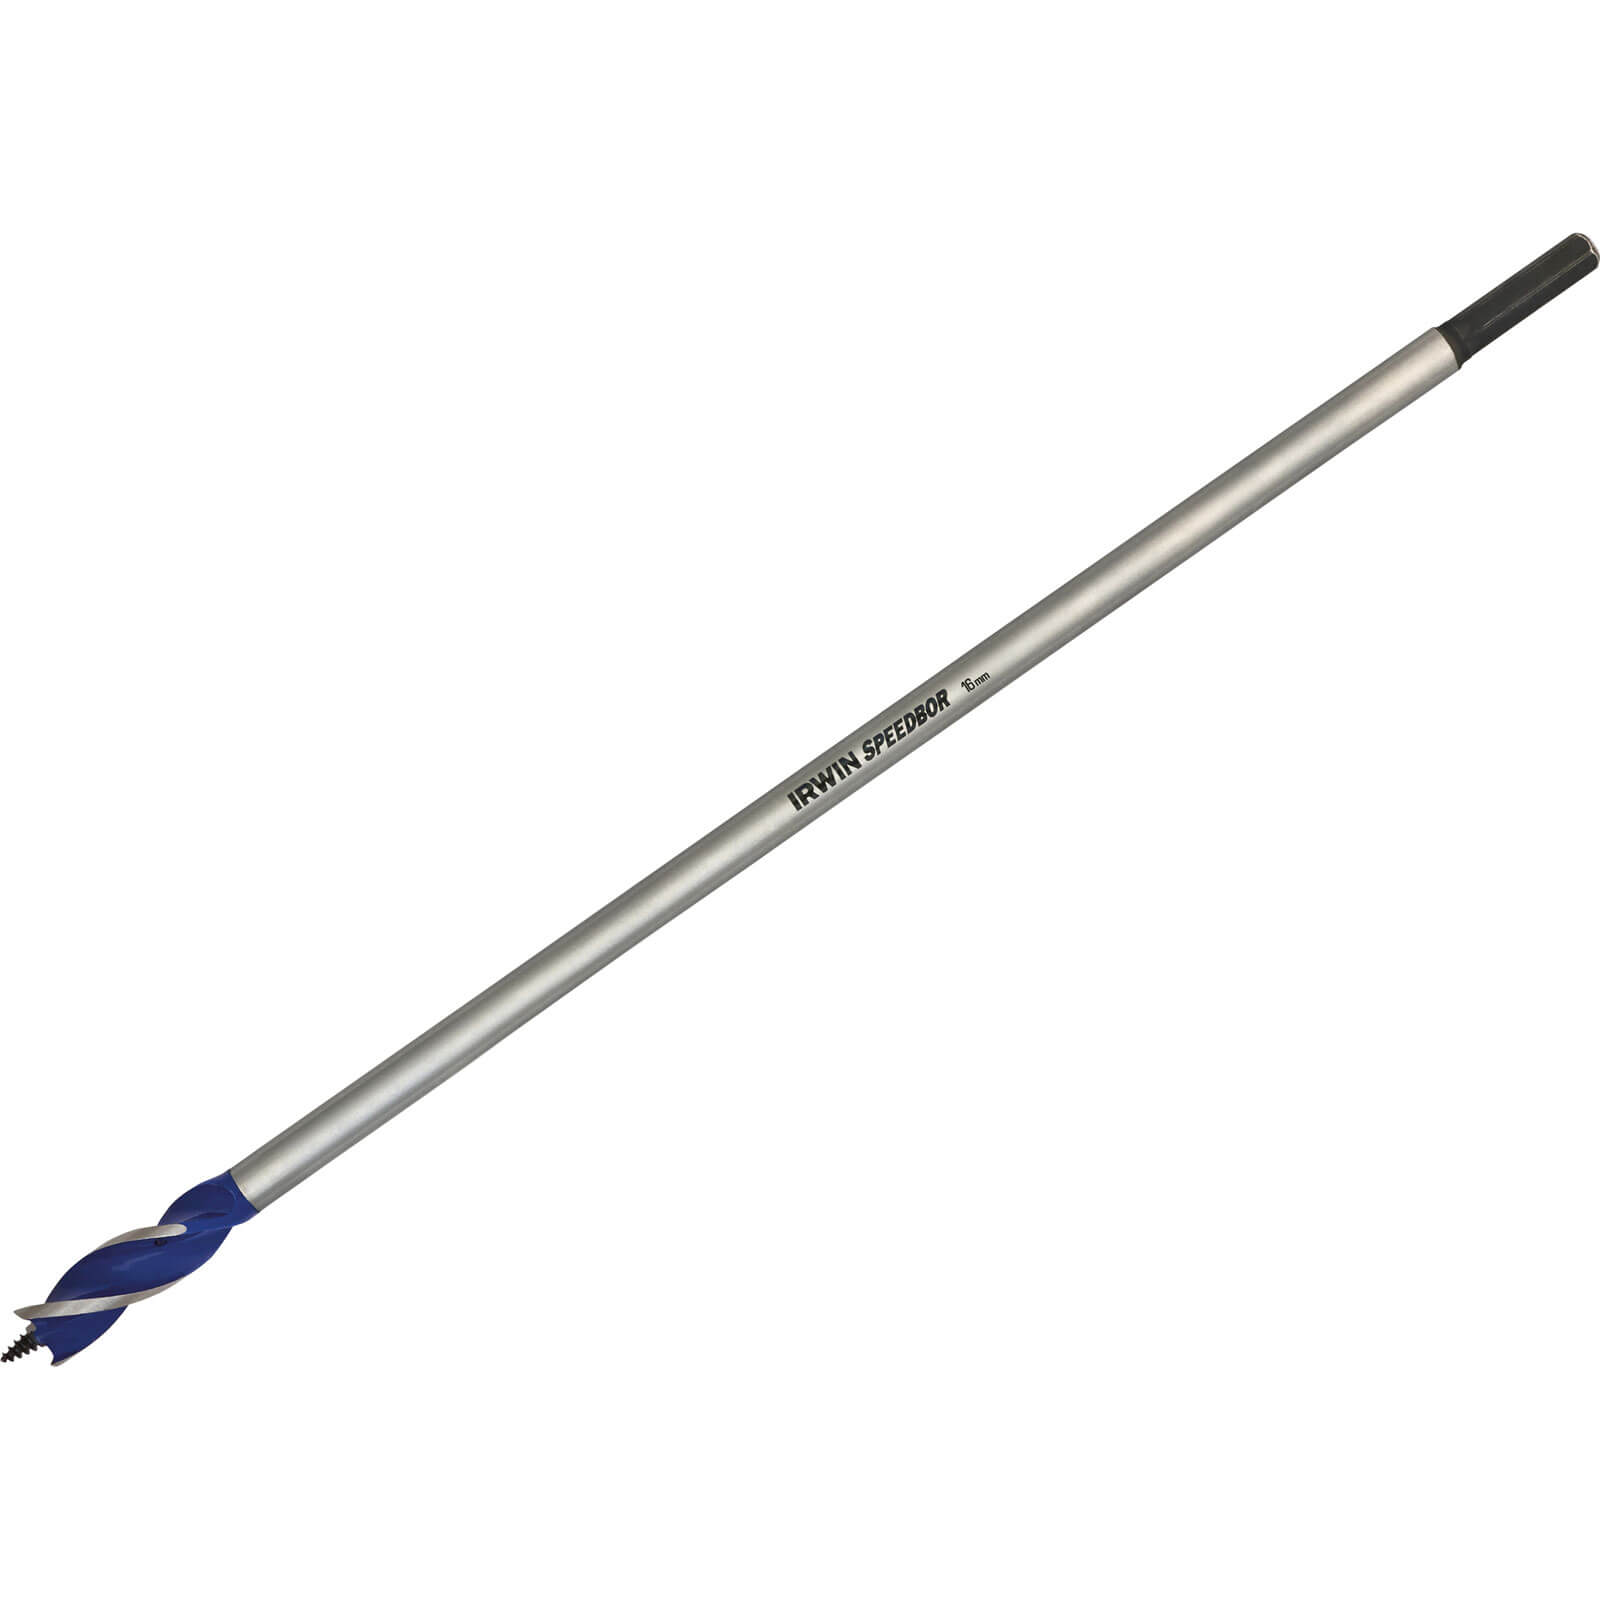 Image of Irwin 6X Blue Groove Extra Long Wood Drill Bit 16mm 400mm